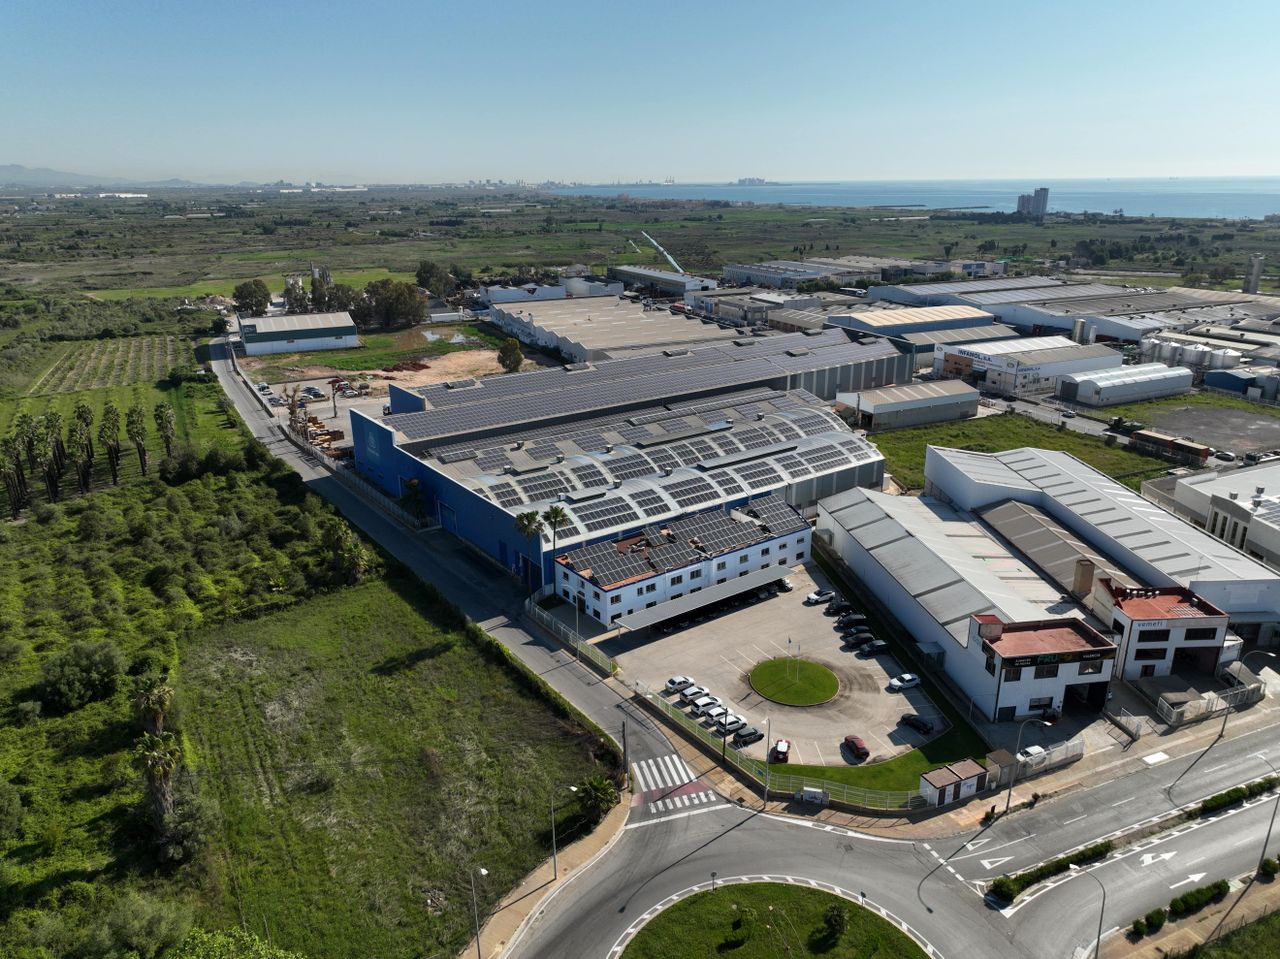 Photovoltaic plant at the El Puig site (c) thyssenkrupp Materials Services